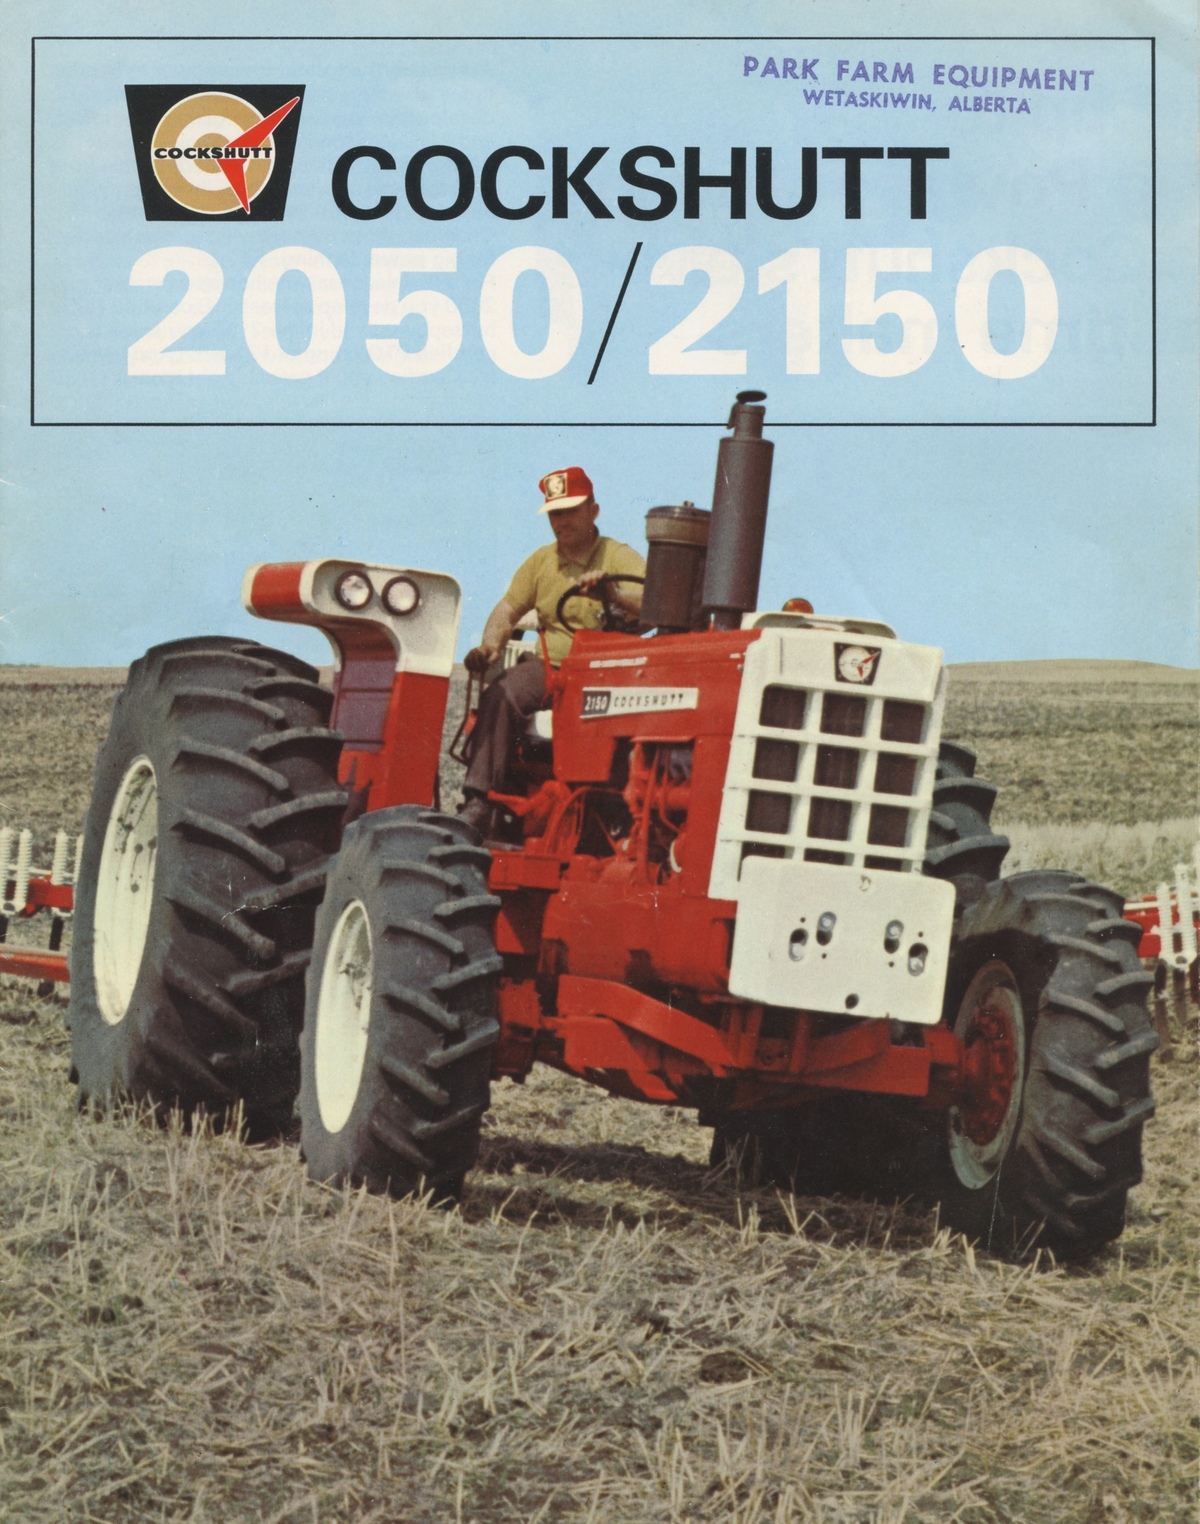 Posted by: J.Hasert in Brochure of the Week 261: Cockshutt 2050/2150